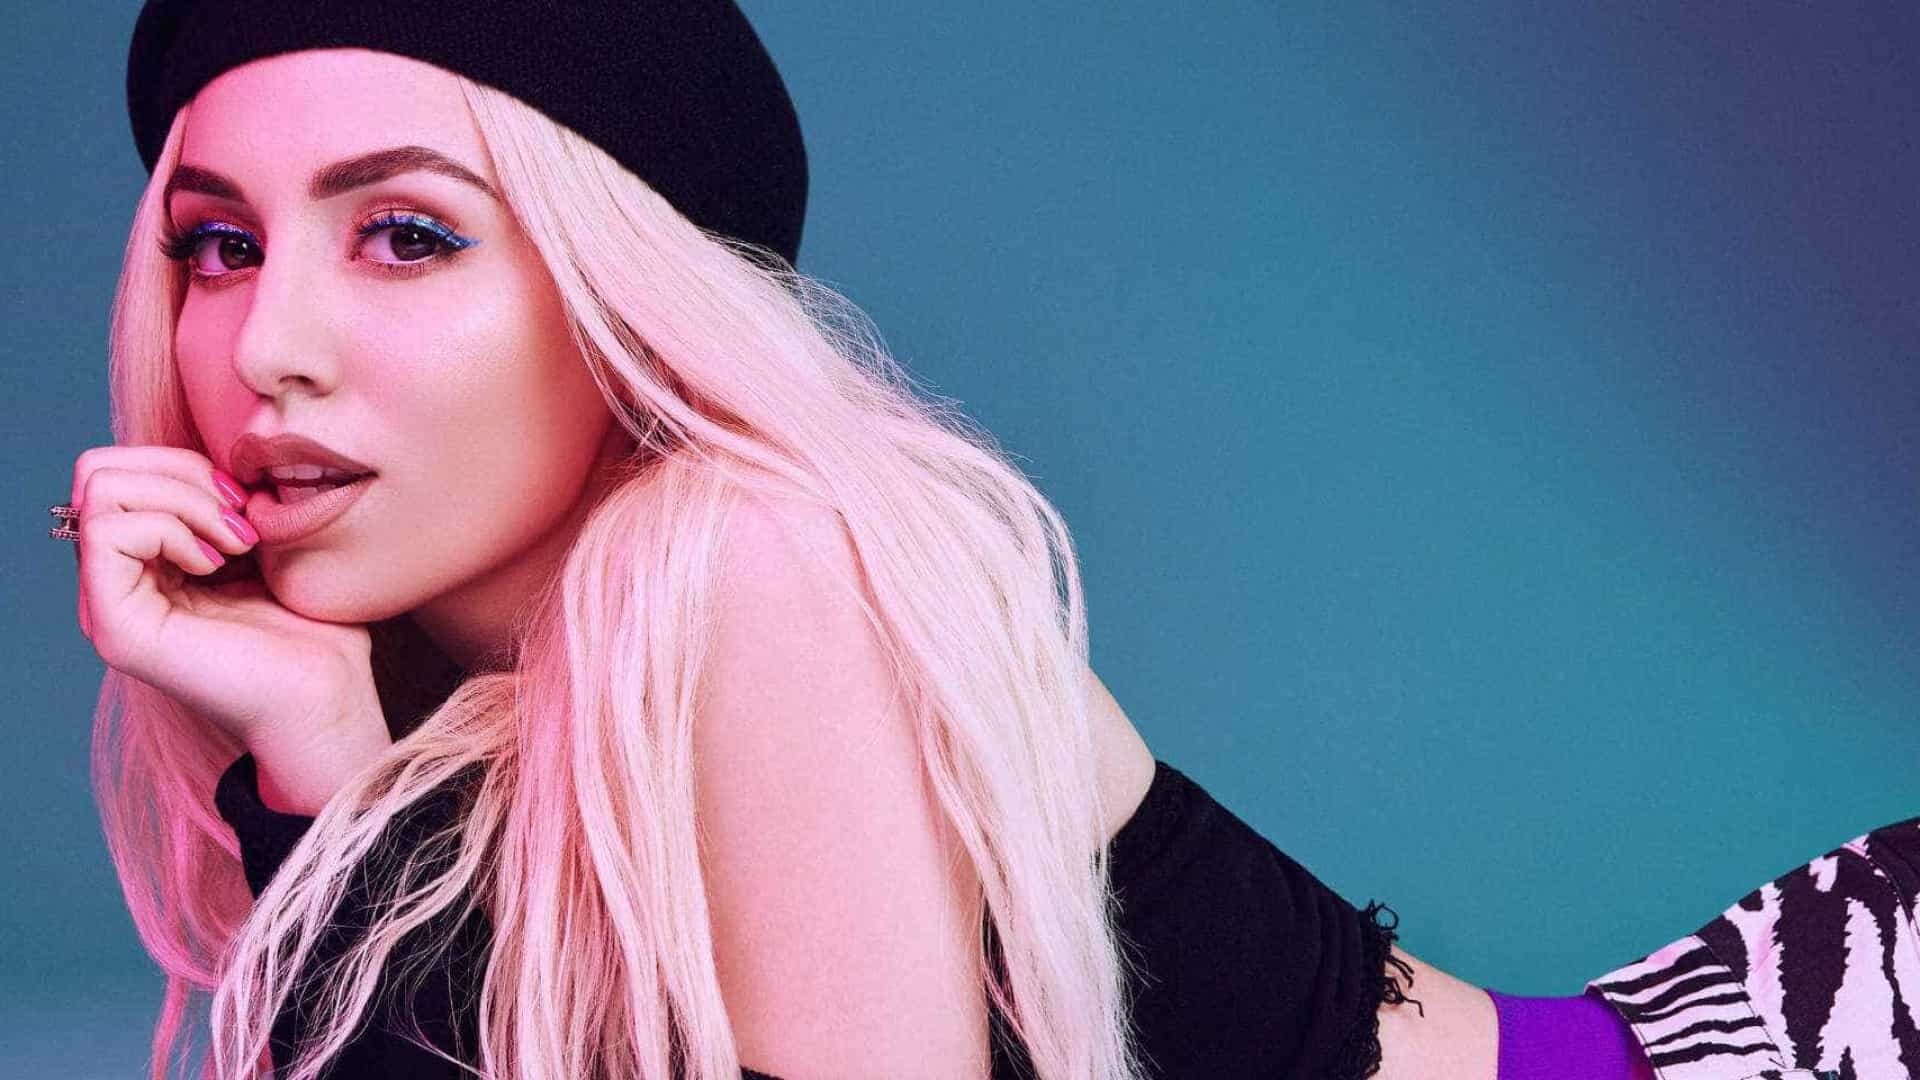 Ava Max: A song, "My Head and My Heart", was released on November 19, 2020. 1920x1080 Full HD Wallpaper.